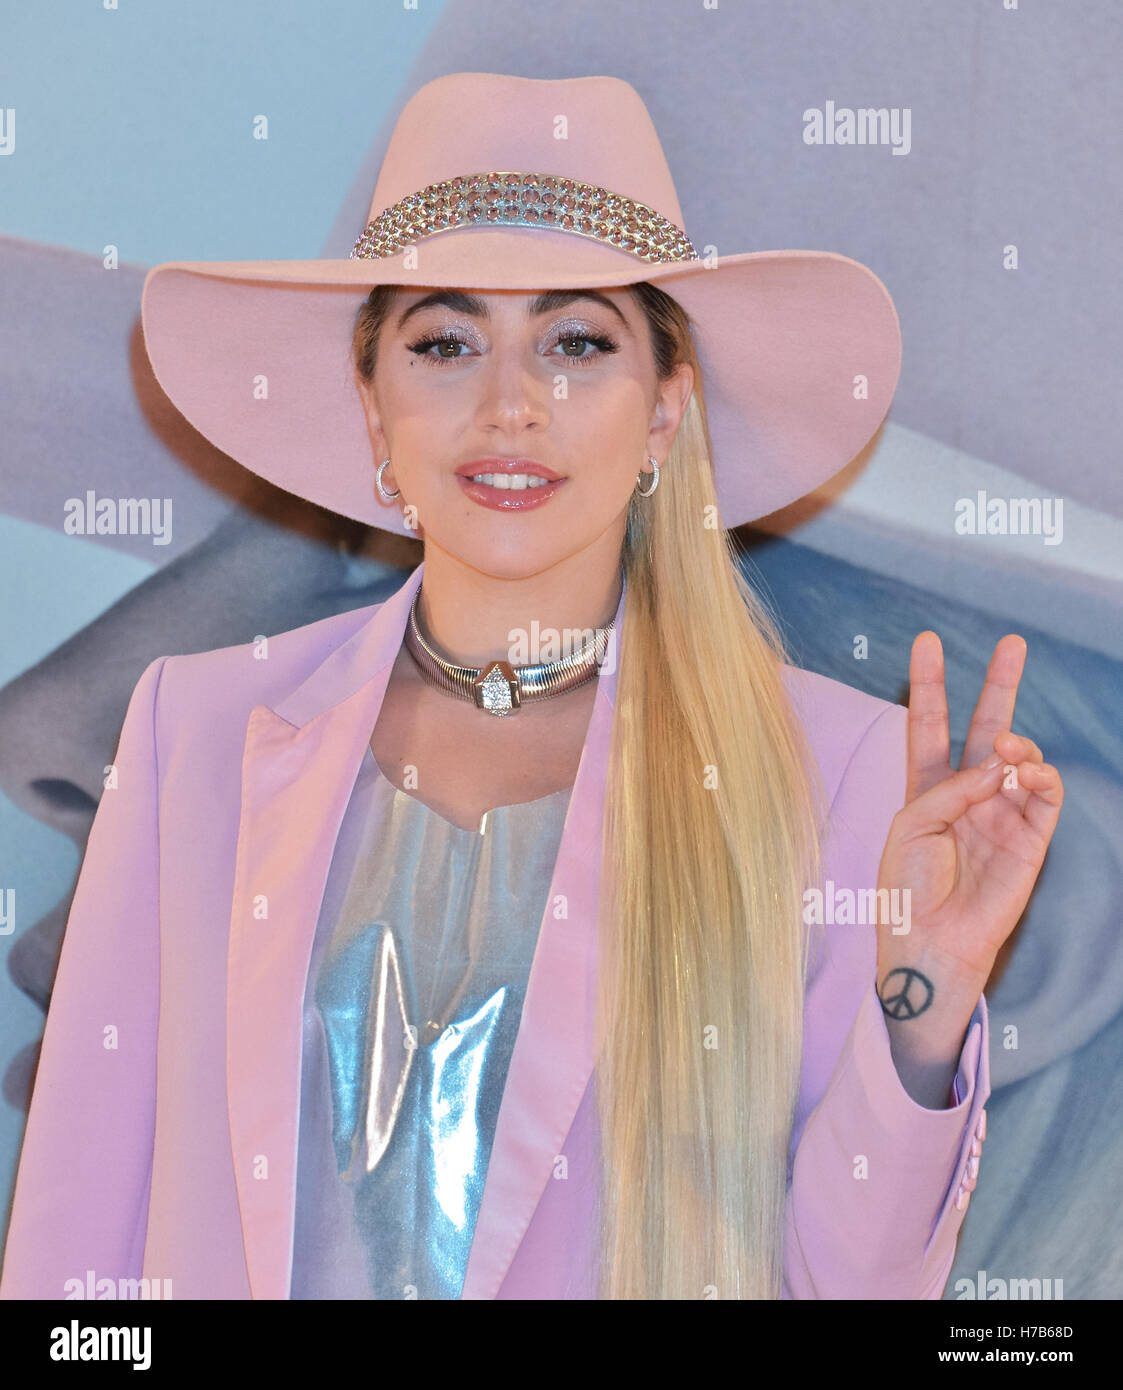 Lady GAGA, November 2, 2016, Tokyo, Japan : Singer Lady GAGA attends the press conference for her new album 'Joanne' at the Ritz-Carlton Tokyo, on November 2, 2016 in Japan. Stock Photo